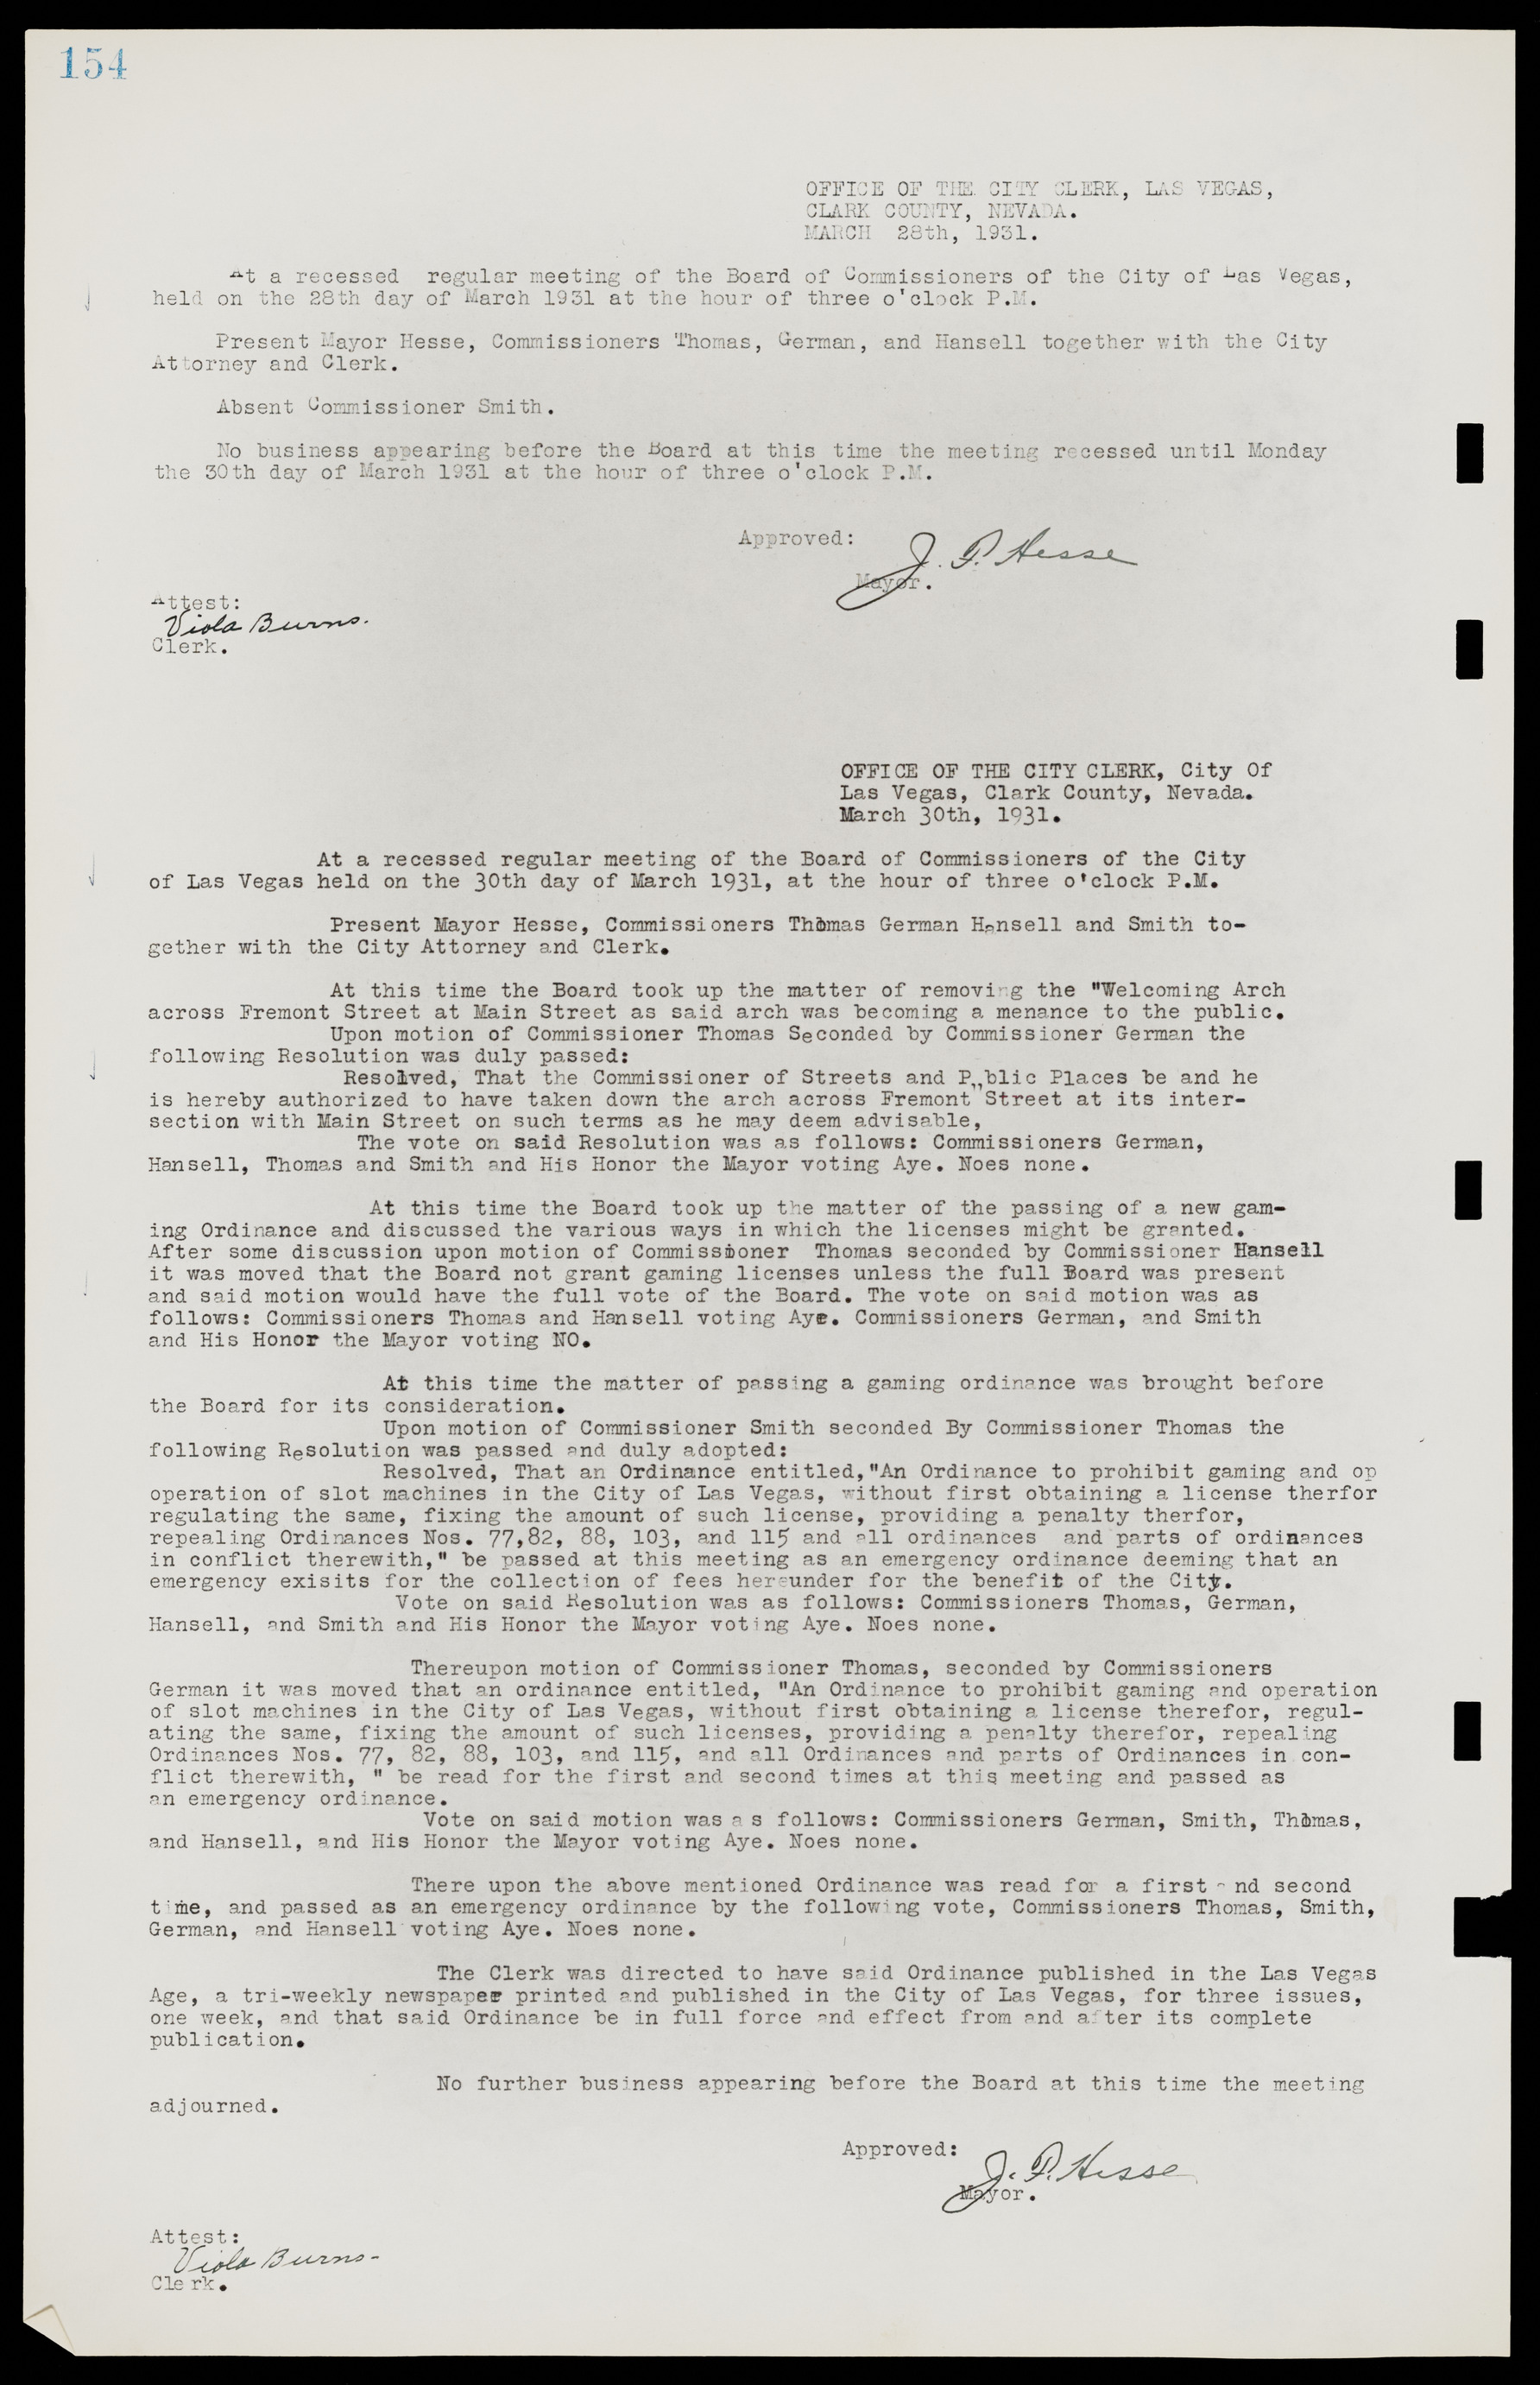 Las Vegas City Commission Minutes, May 14, 1929 to February 11, 1937, lvc000003-160